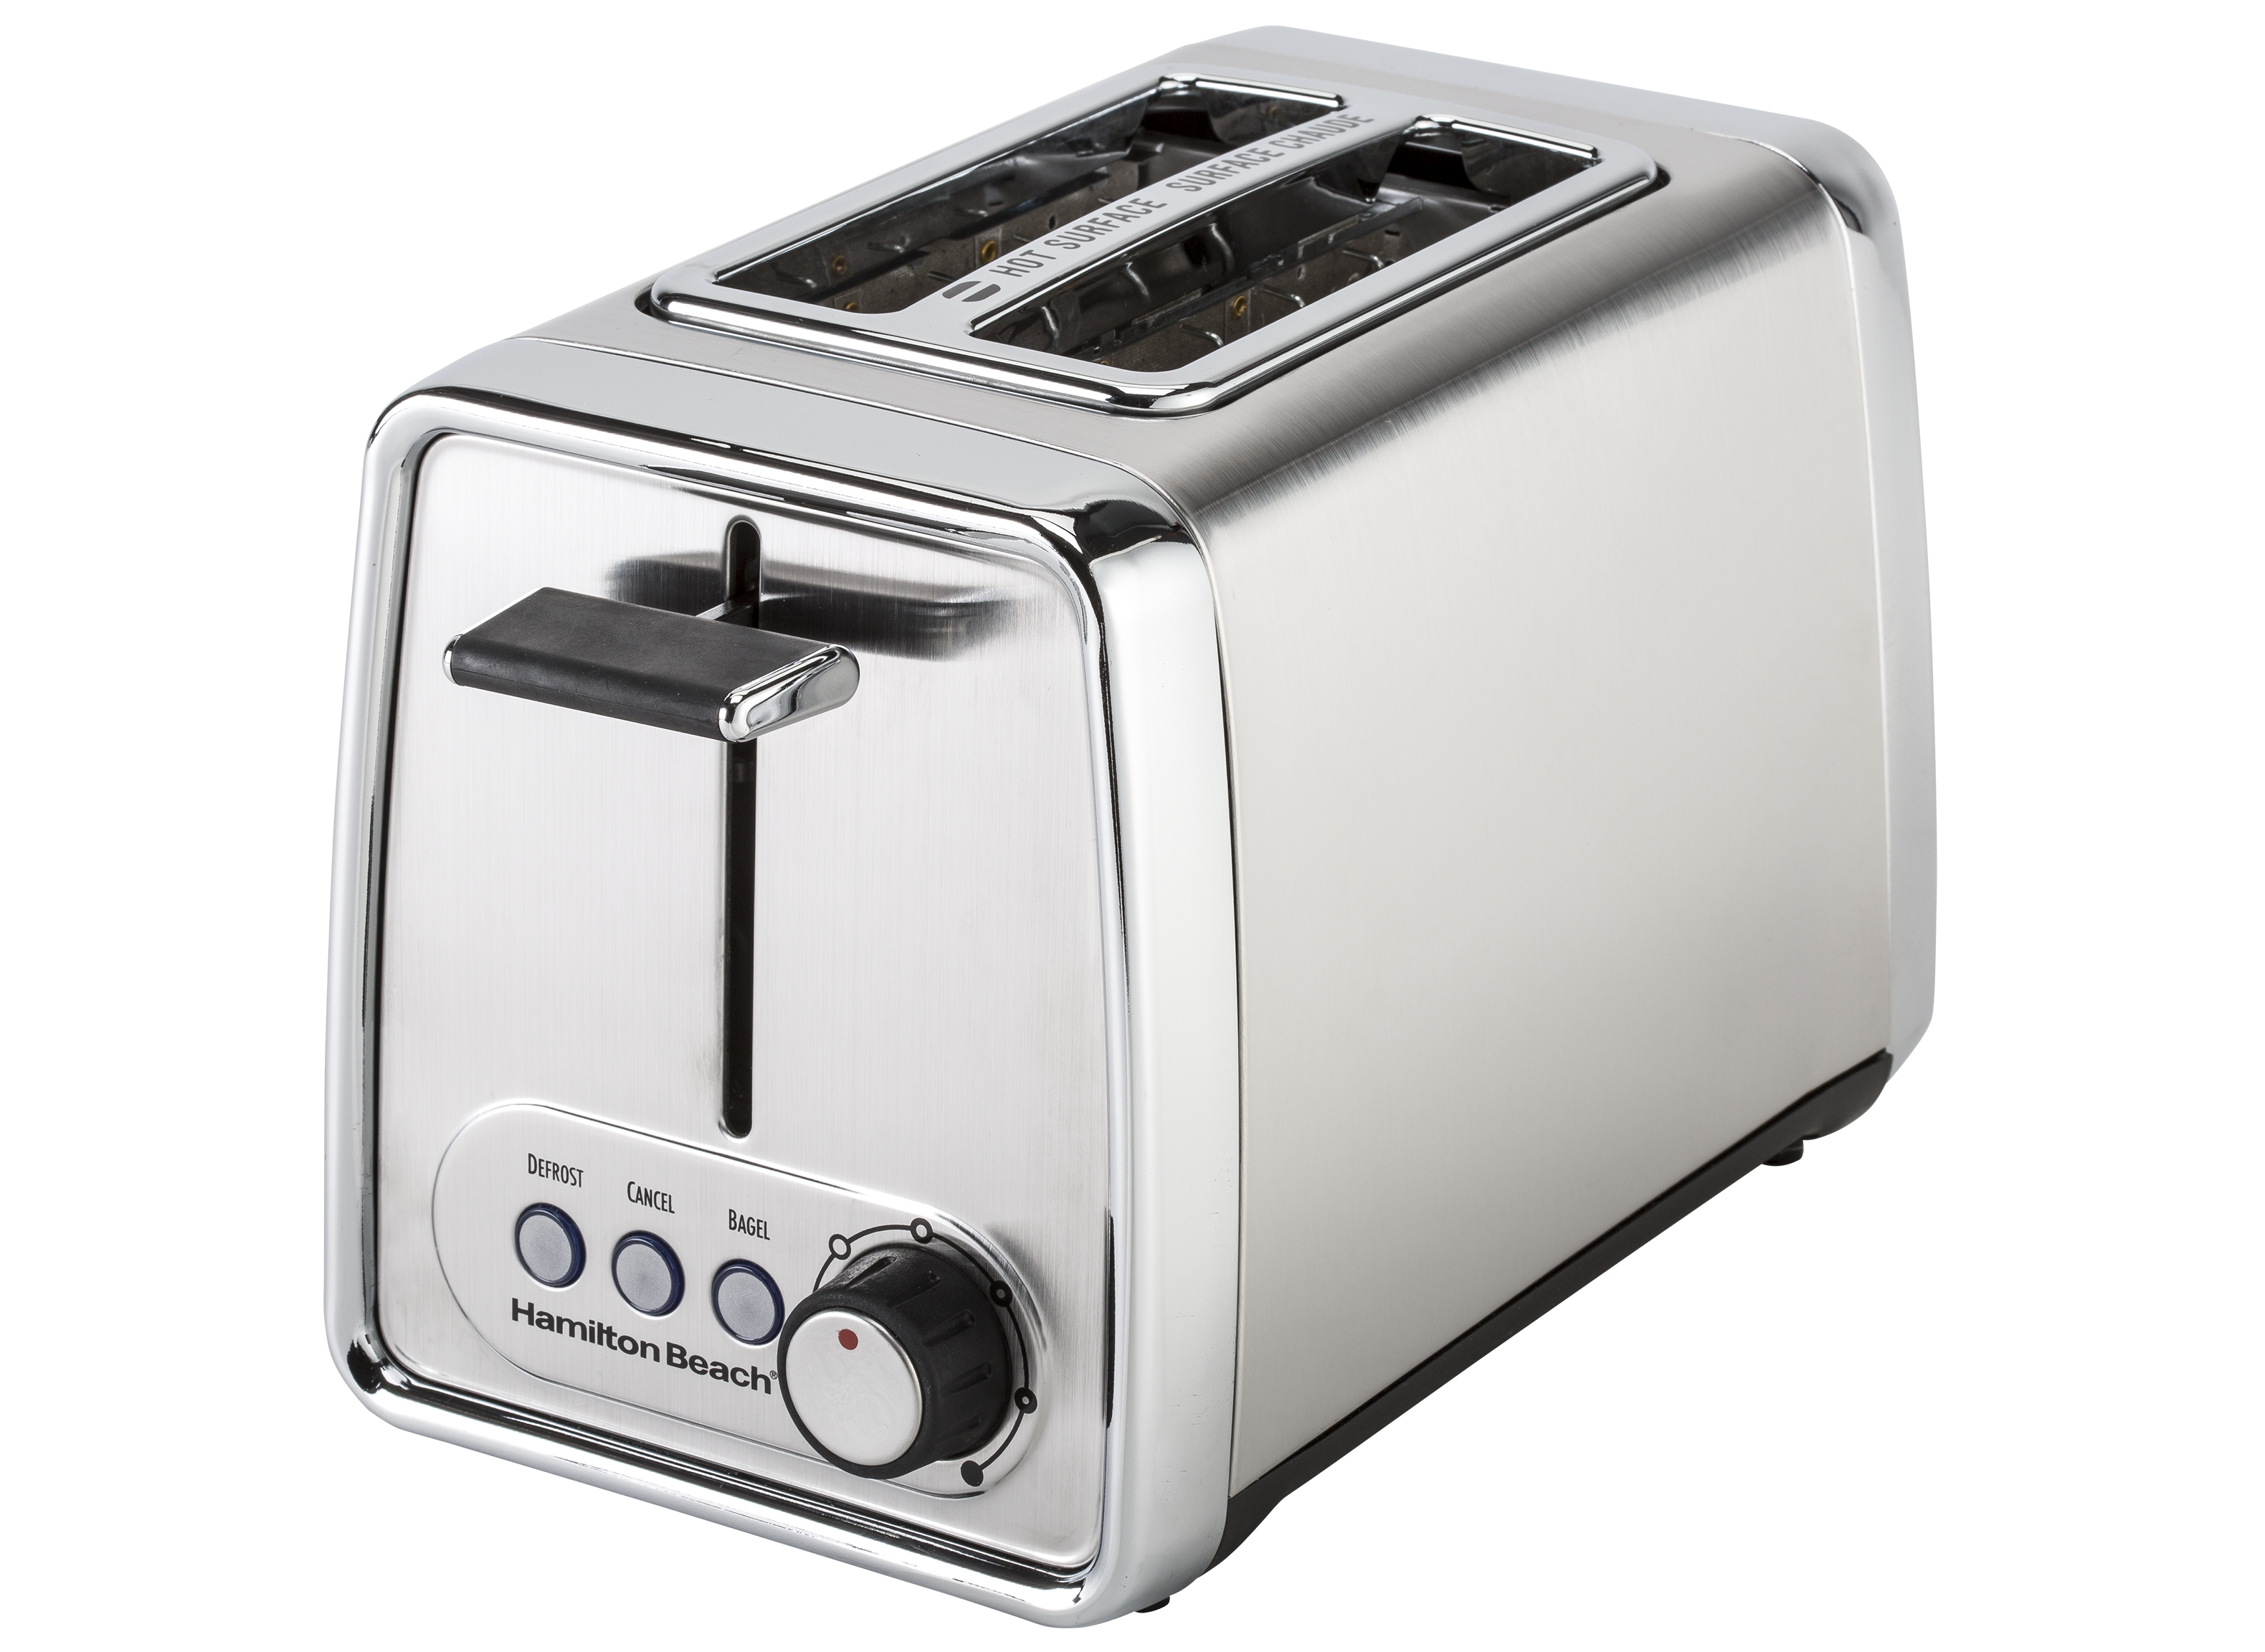 Hamilton Beach 2-in-1 Countertop Oven and 2-Slice Toaster 22723 Toaster & Toaster  Oven Review - Consumer Reports